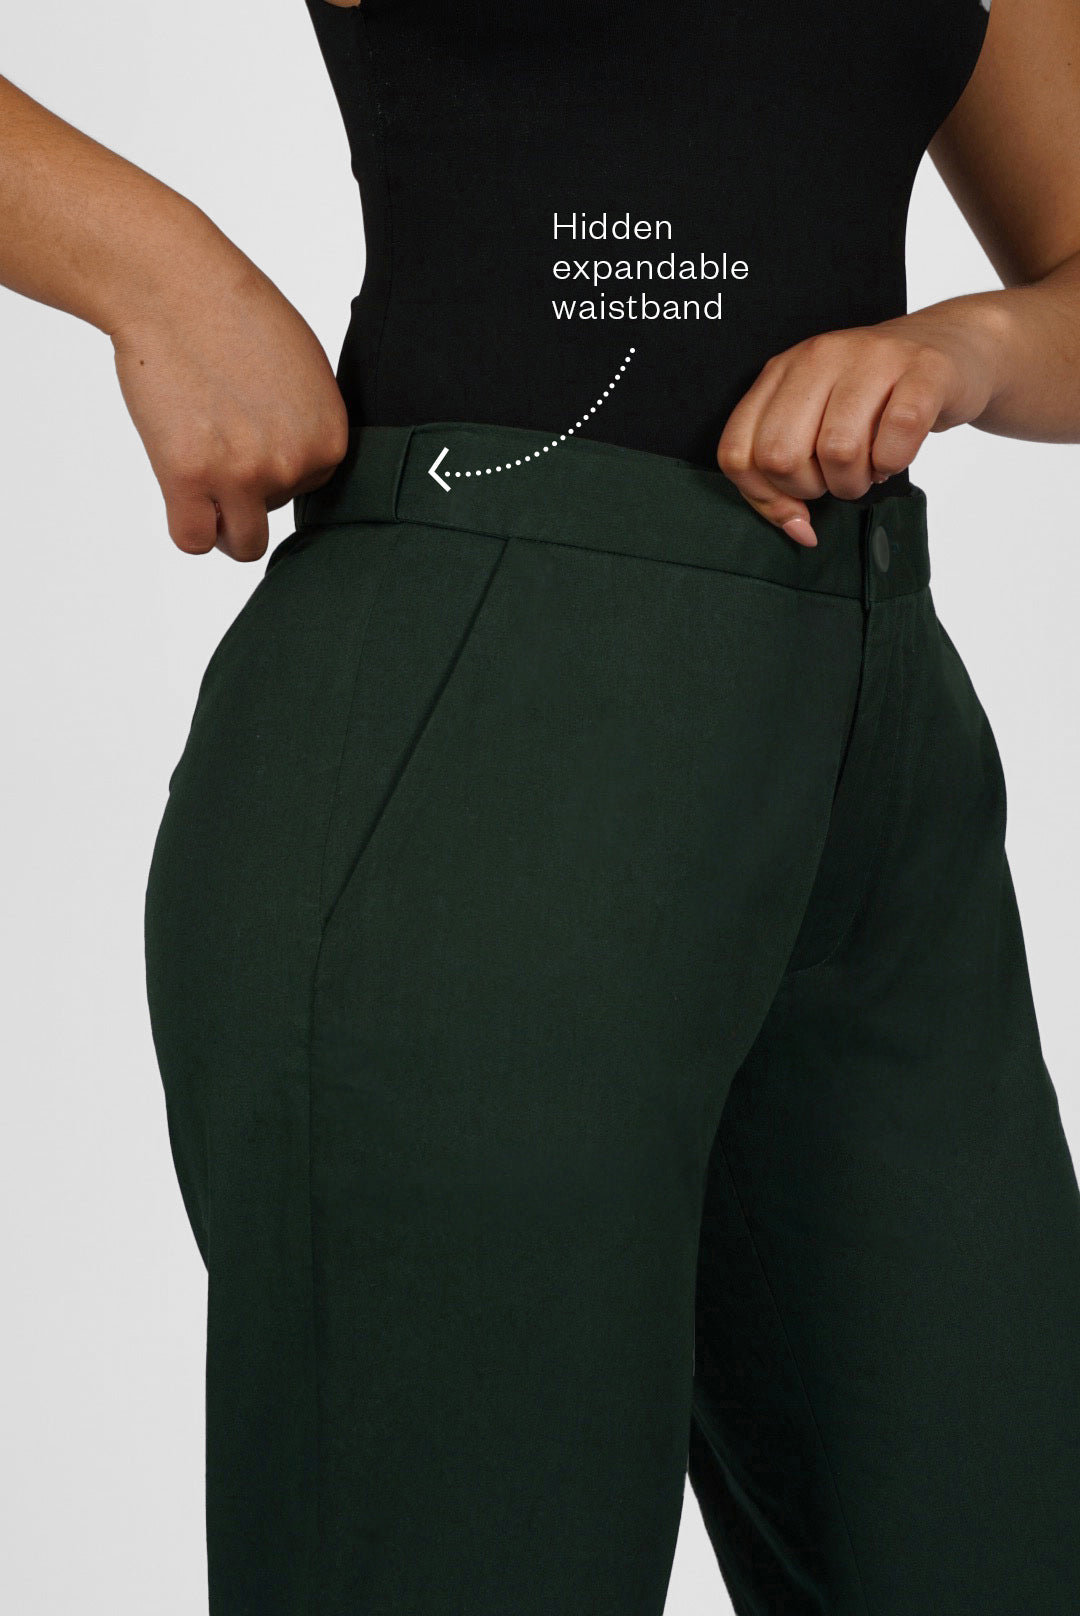 The Flex Waist Pant by Aam is a chic, cotton trouser with a hidden expandable waistband that provides 2-3